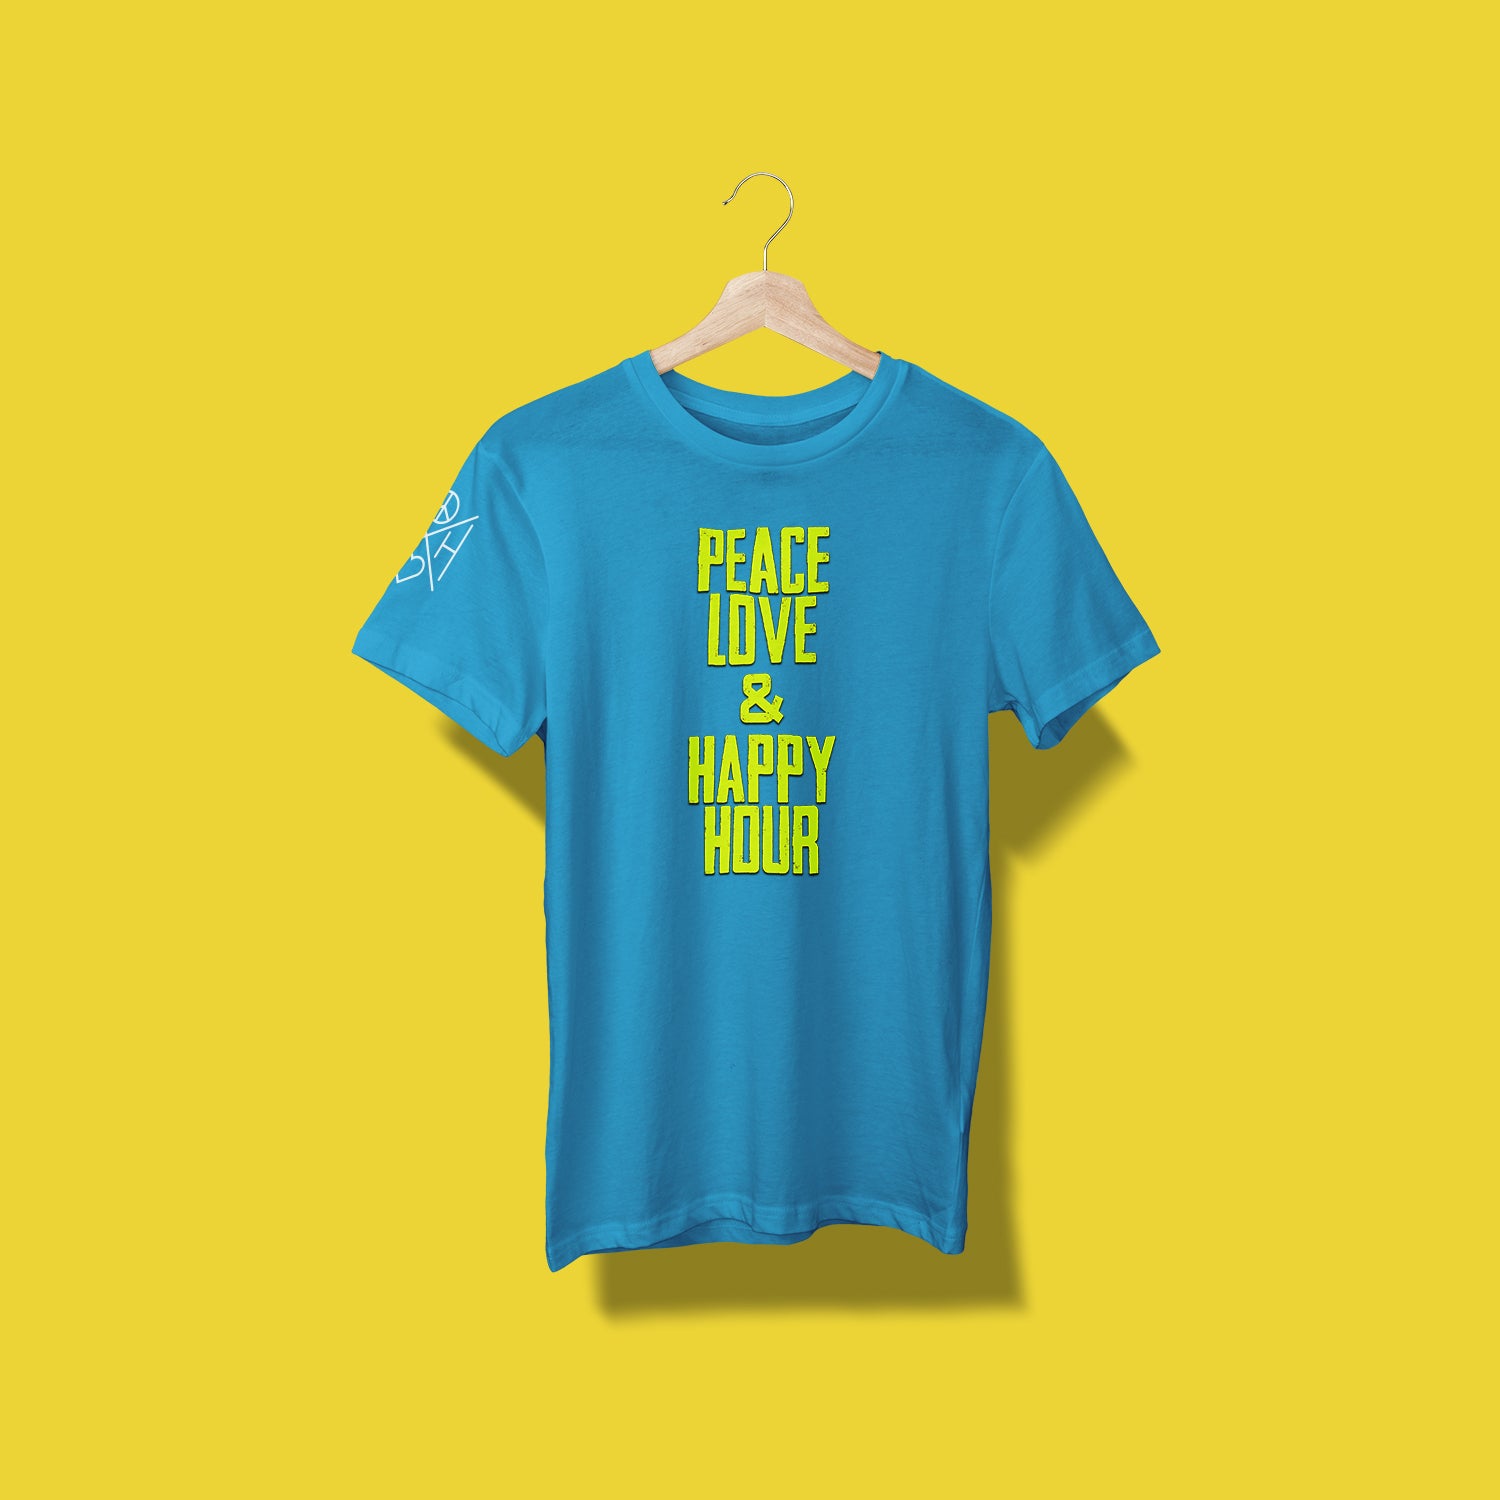 Happy Vibes and Hour – Good Peace Love T-Shirt